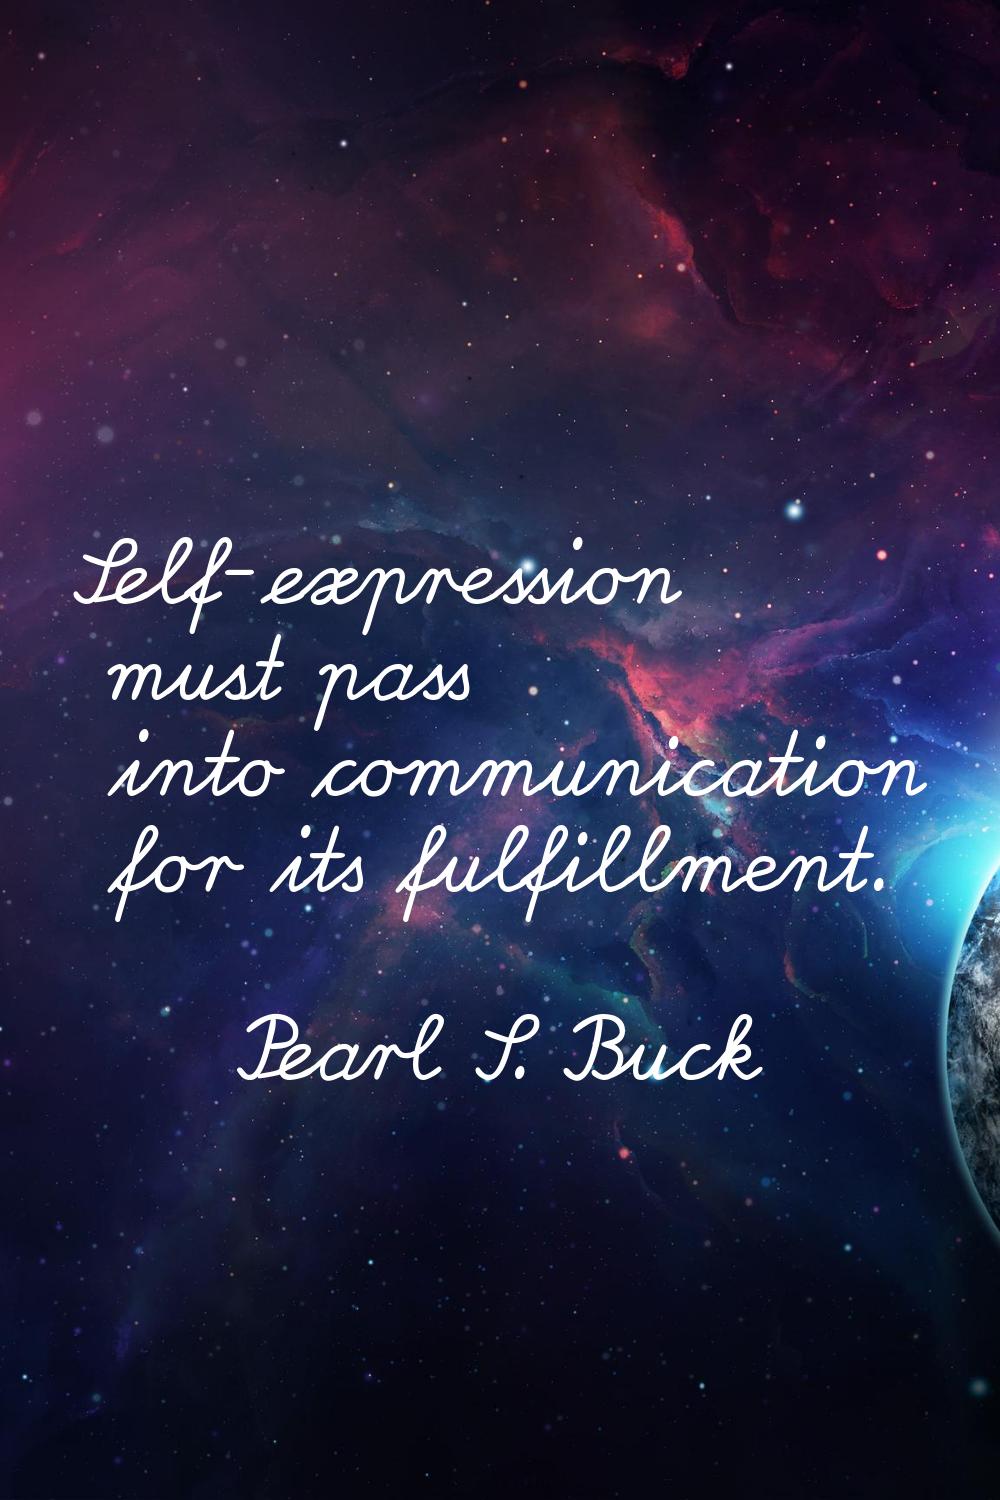 Self-expression must pass into communication for its fulfillment.